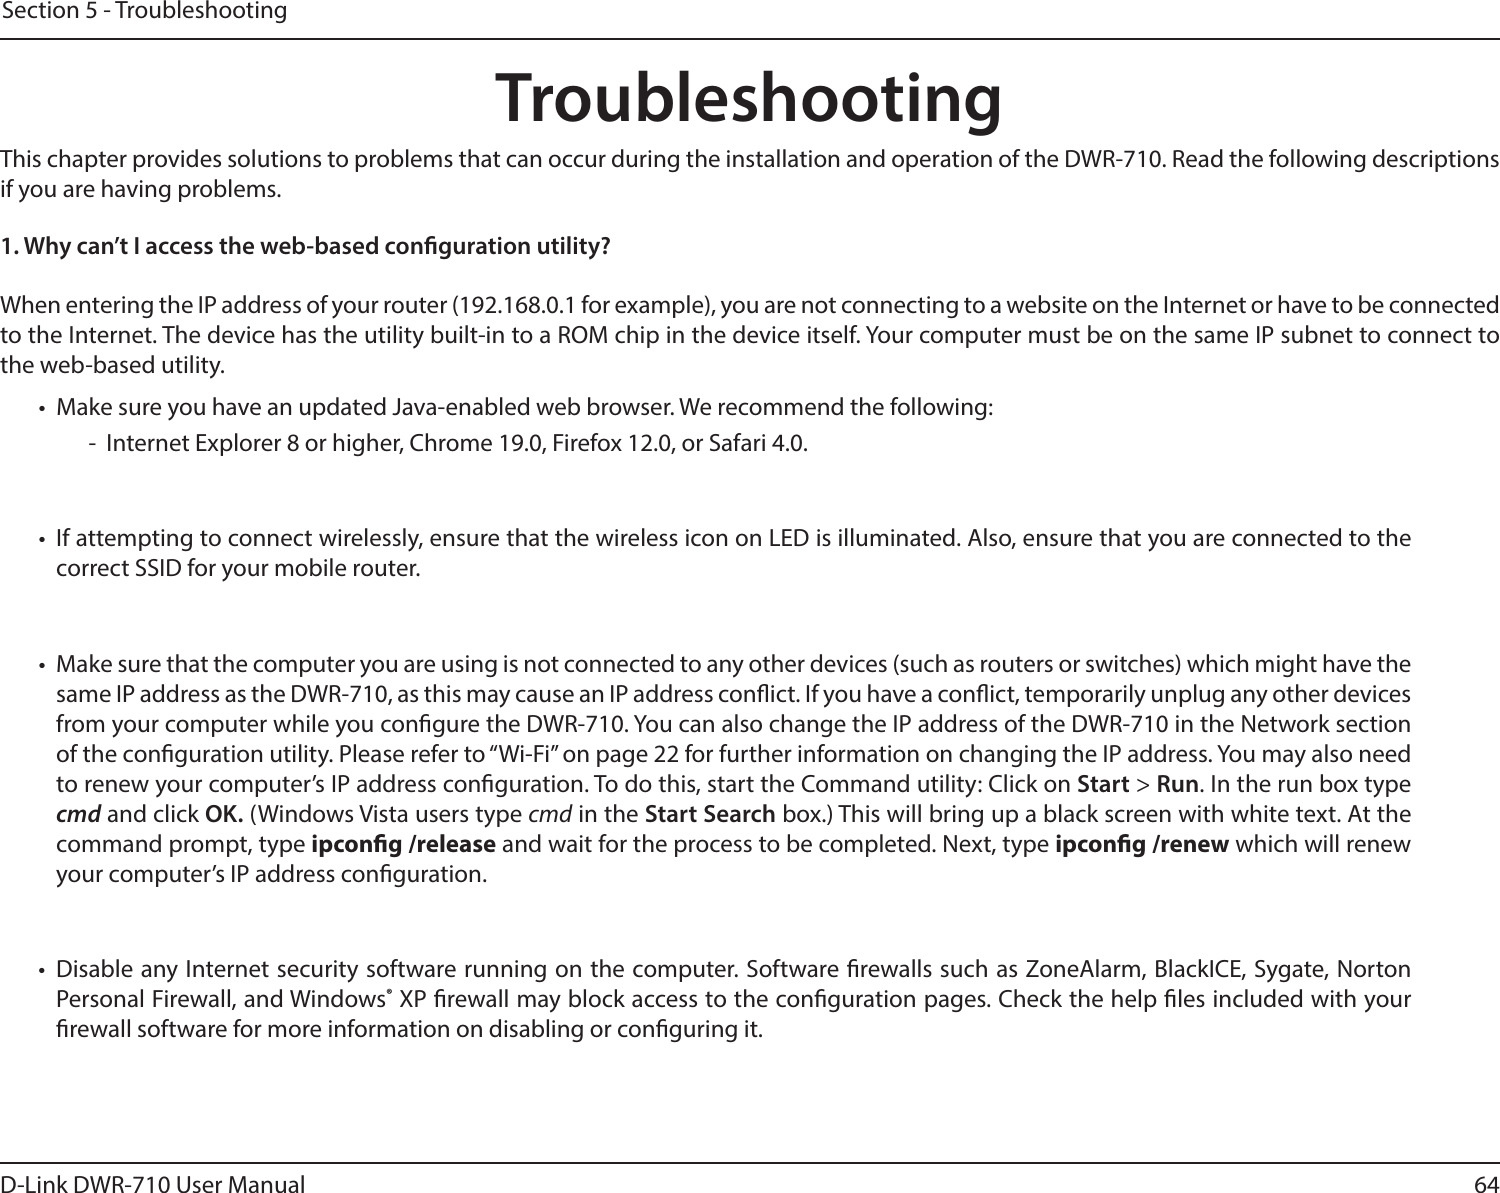 64D-Link DWR-710 User ManualSection 5 - TroubleshootingTroubleshootingThis chapter provides solutions to problems that can occur during the installation and operation of the DWR-710. Read the following descriptions if you are having problems.1. Why can’t I access the web-based conguration utility?When entering the IP address of your router (192.168.0.1 for example), you are not connecting to a website on the Internet or have to be connected to the Internet. The device has the utility built-in to a ROM chip in the device itself. Your computer must be on the same IP subnet to connect to the web-based utility. •  Make sure you have an updated Java-enabled web browser. We recommend the following:  -  Internet Explorer 8 or higher, Chrome 19.0, Firefox 12.0, or Safari 4.0.•  If attempting to connect wirelessly, ensure that the wireless icon on LED is illuminated. Also, ensure that you are connected to the correct SSID for your mobile router. •  Make sure that the computer you are using is not connected to any other devices (such as routers or switches) which might have the same IP address as the DWR-710, as this may cause an IP address conict. If you have a conict, temporarily unplug any other devices from your computer while you congure the DWR-710. You can also change the IP address of the DWR-710 in the Network section of the conguration utility. Please refer to “Wi-Fi” on page 22 for further information on changing the IP address. You may also need to renew your computer’s IP address conguration. To do this, start the Command utility: Click on Start &gt; Run. In the run box type cmd and click OK. (Windows Vista users type cmd in the Start Search box.) This will bring up a black screen with white text. At the command prompt, type ipcong /release and wait for the process to be completed. Next, type ipcong /renew which will renew your computer’s IP address conguration. •  Disable any Internet security software running on the computer. Software rewalls such as ZoneAlarm, BlackICE, Sygate, Norton Personal Firewall, and Windows® XP rewall may block access to the conguration pages. Check the help les included with your rewall software for more information on disabling or conguring it.